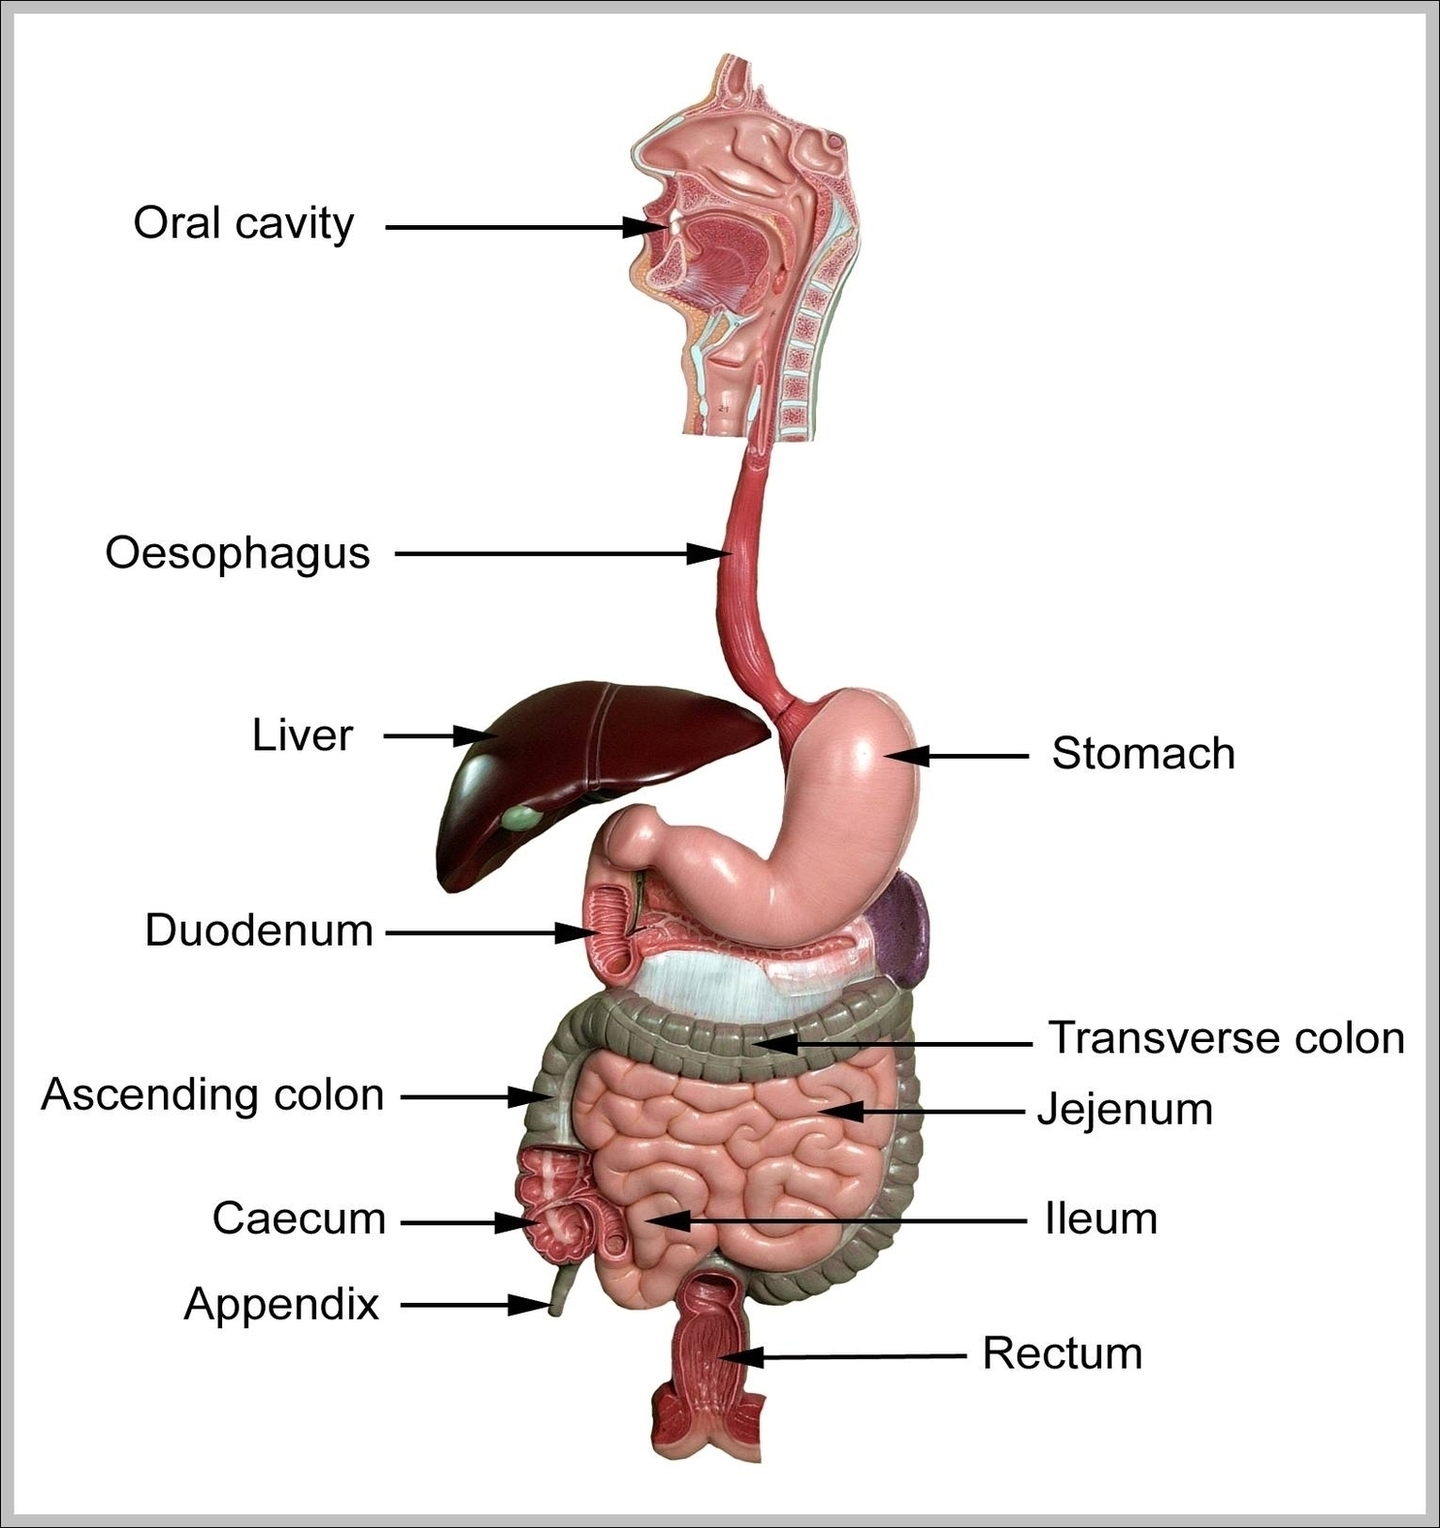 Anatomy Of The Gastrointestinal Tract Image